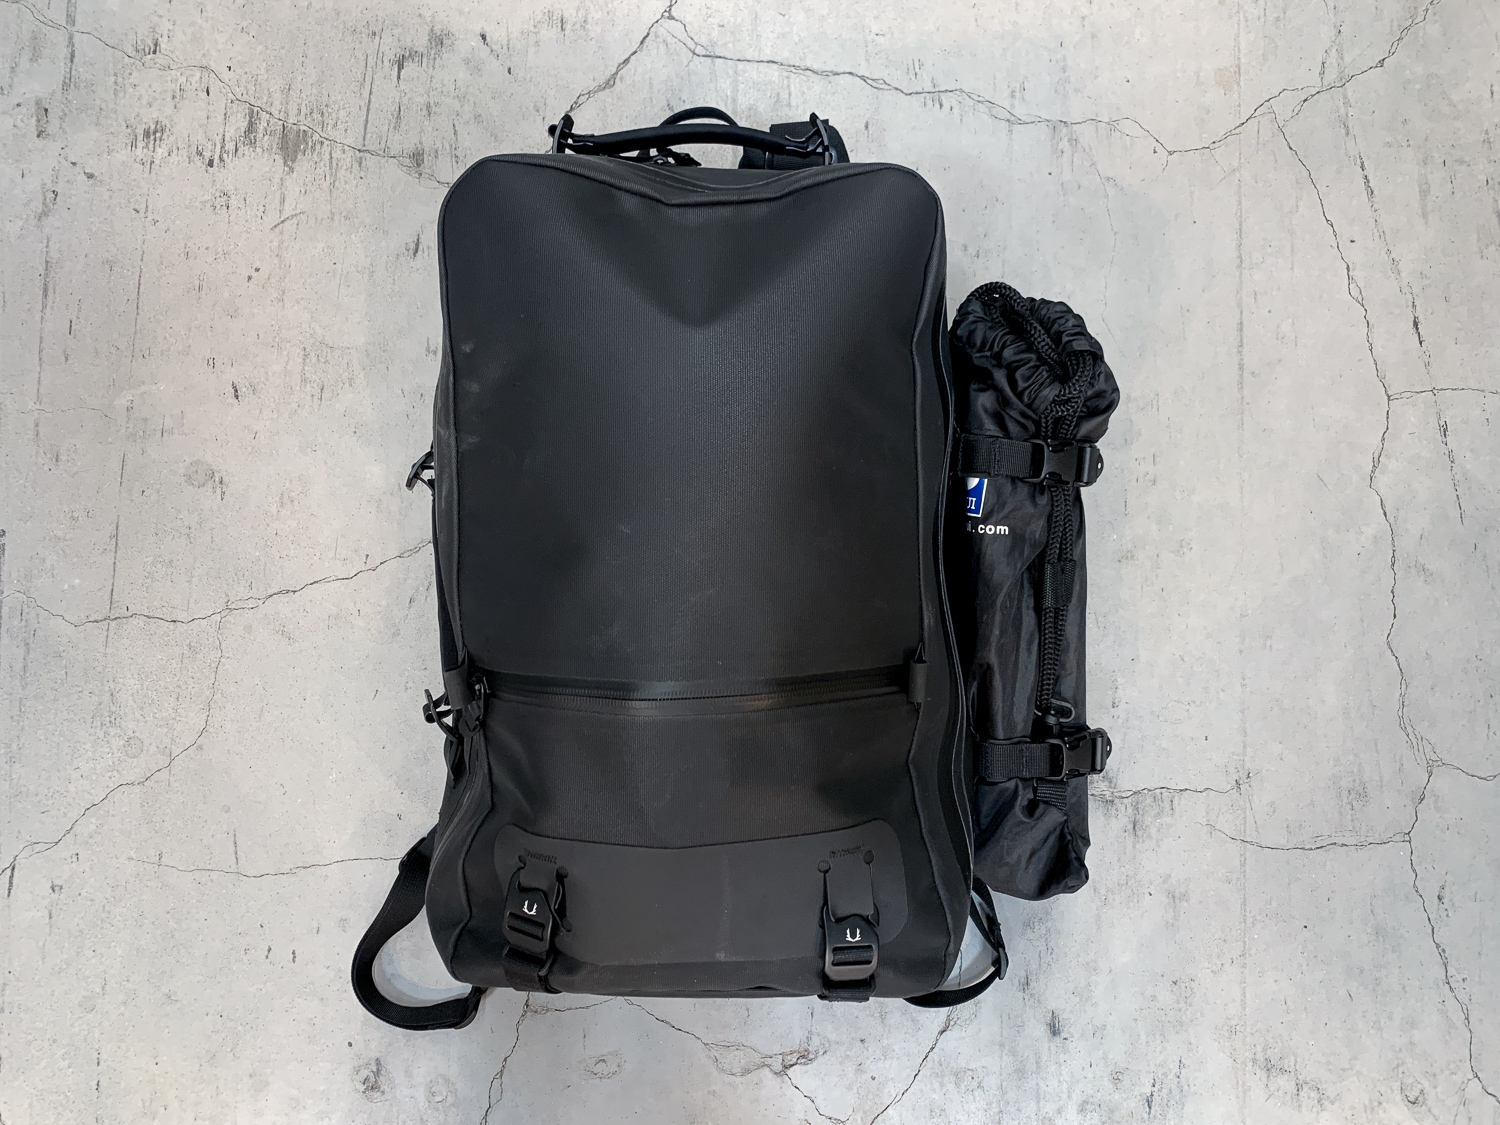 This black minimalist backpack will give unforgettable first impressions.